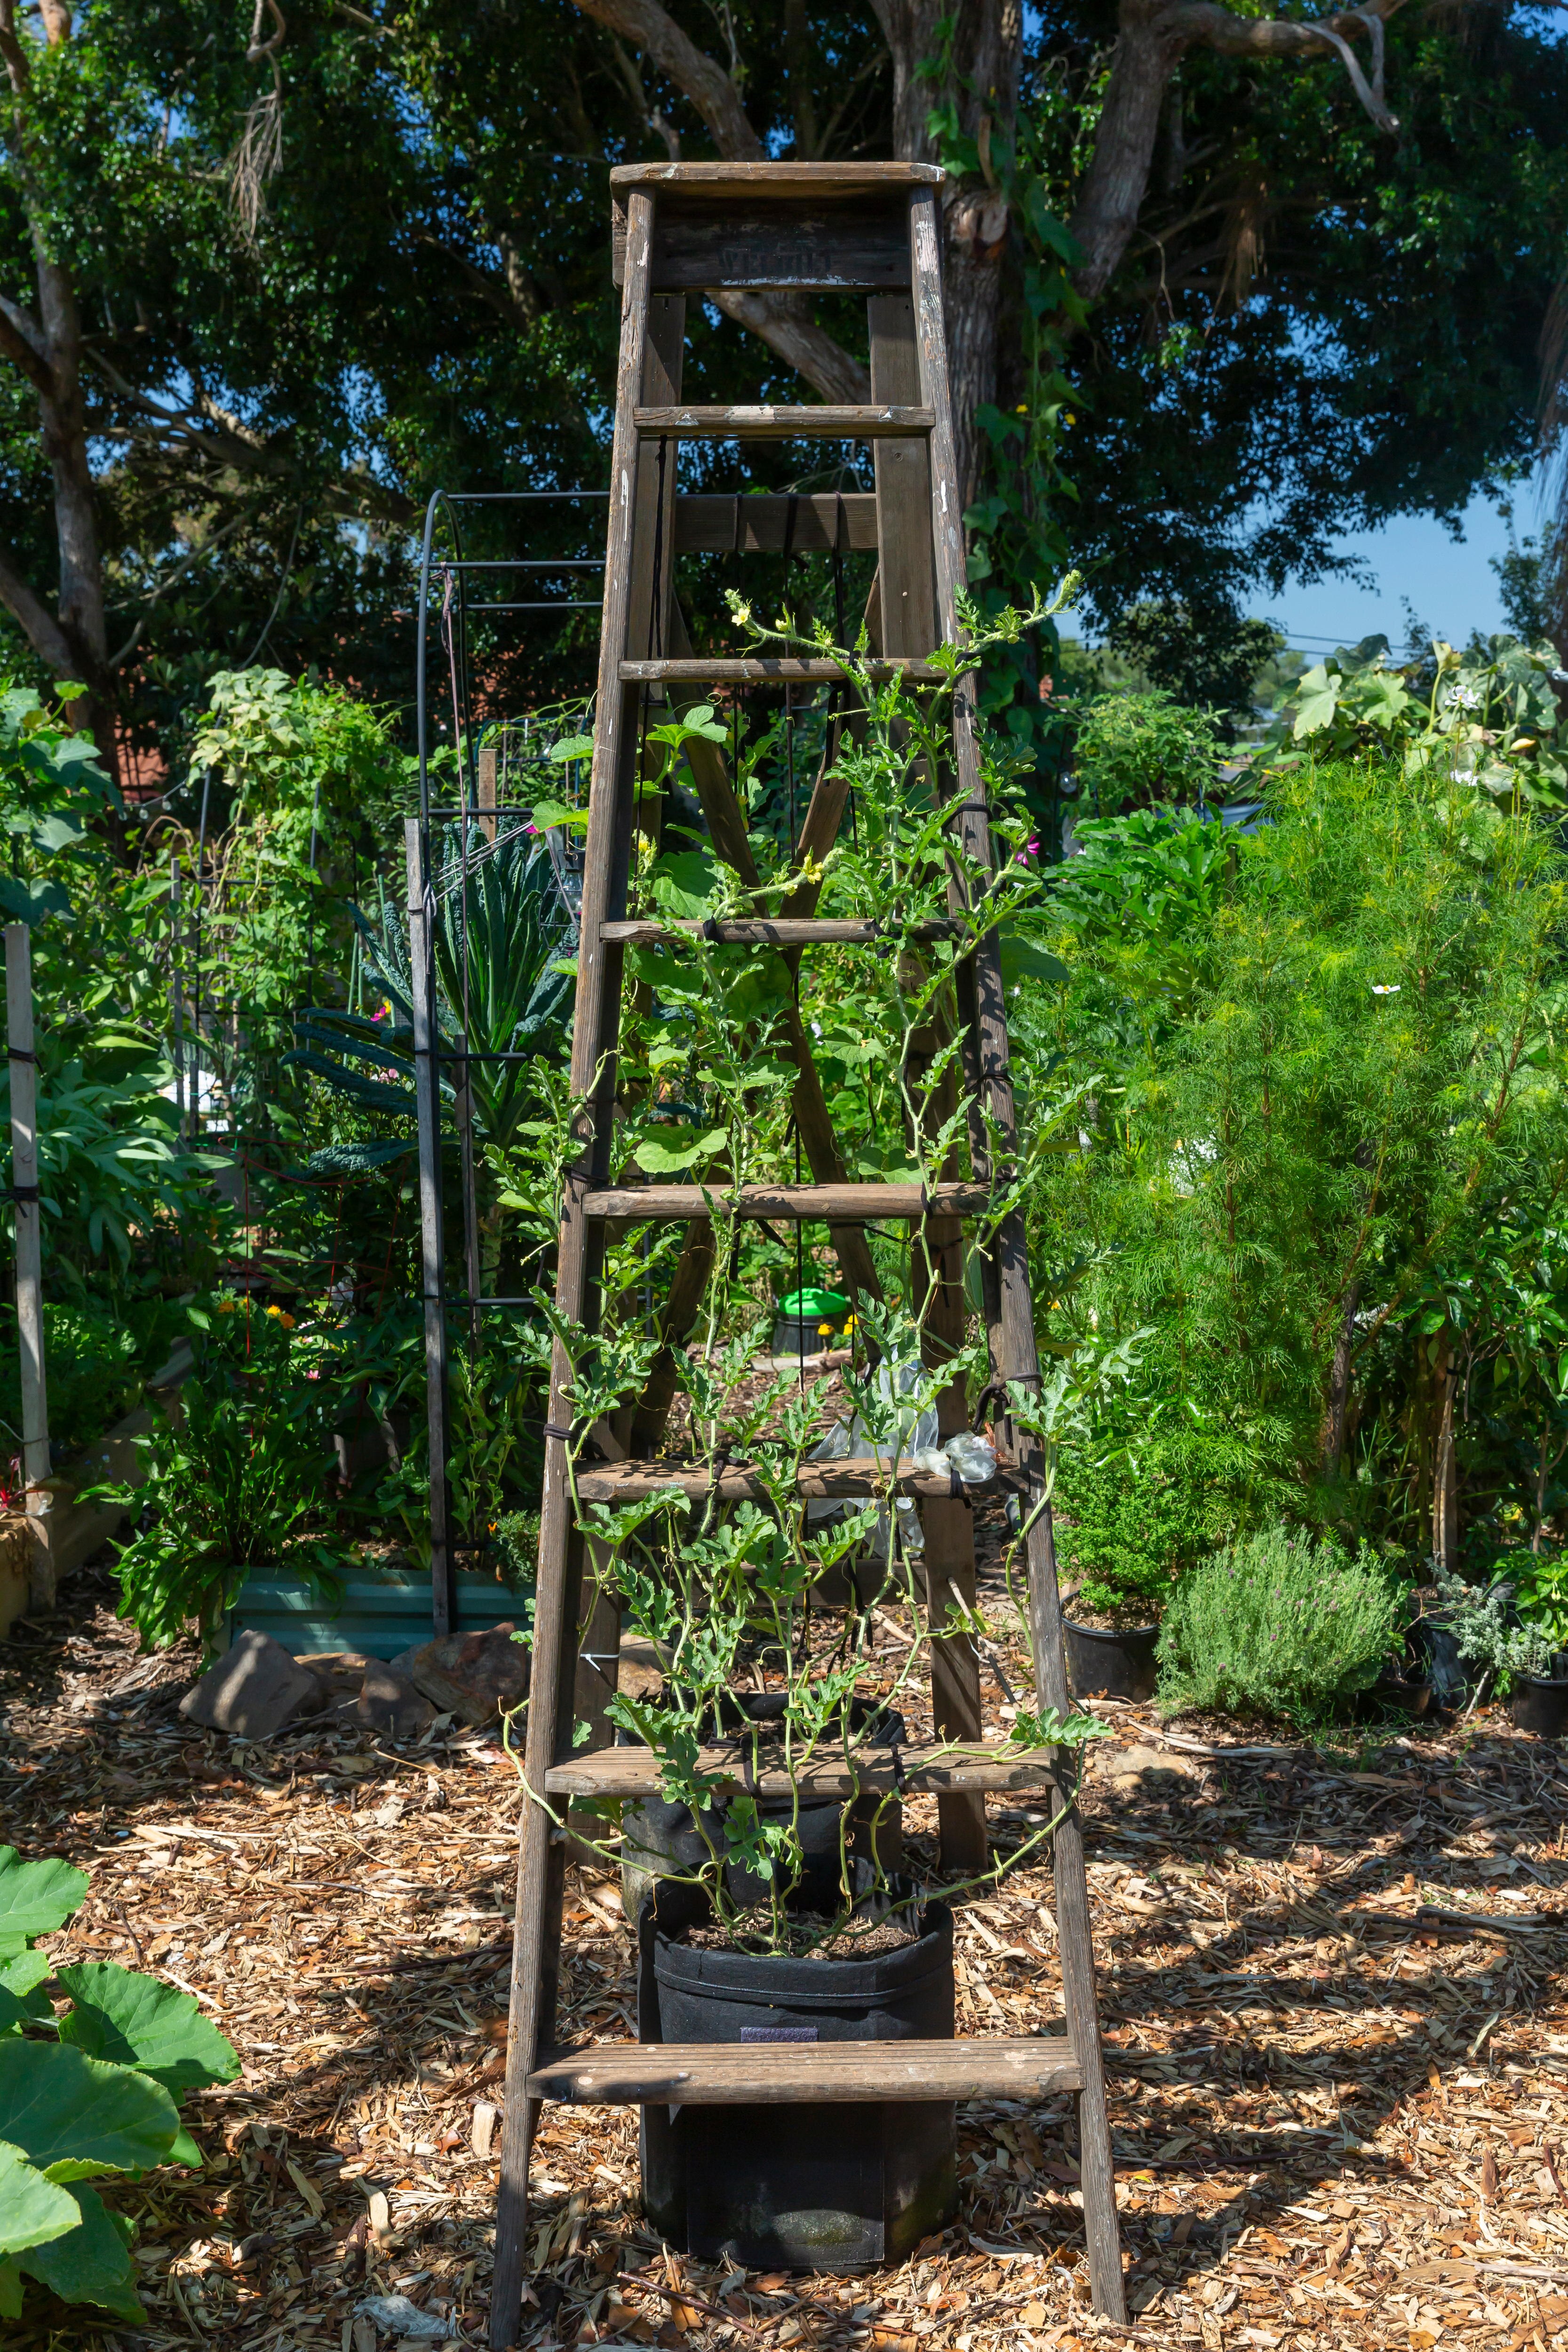 A wooden ladder stands in a garden bed with green vines growing all over it